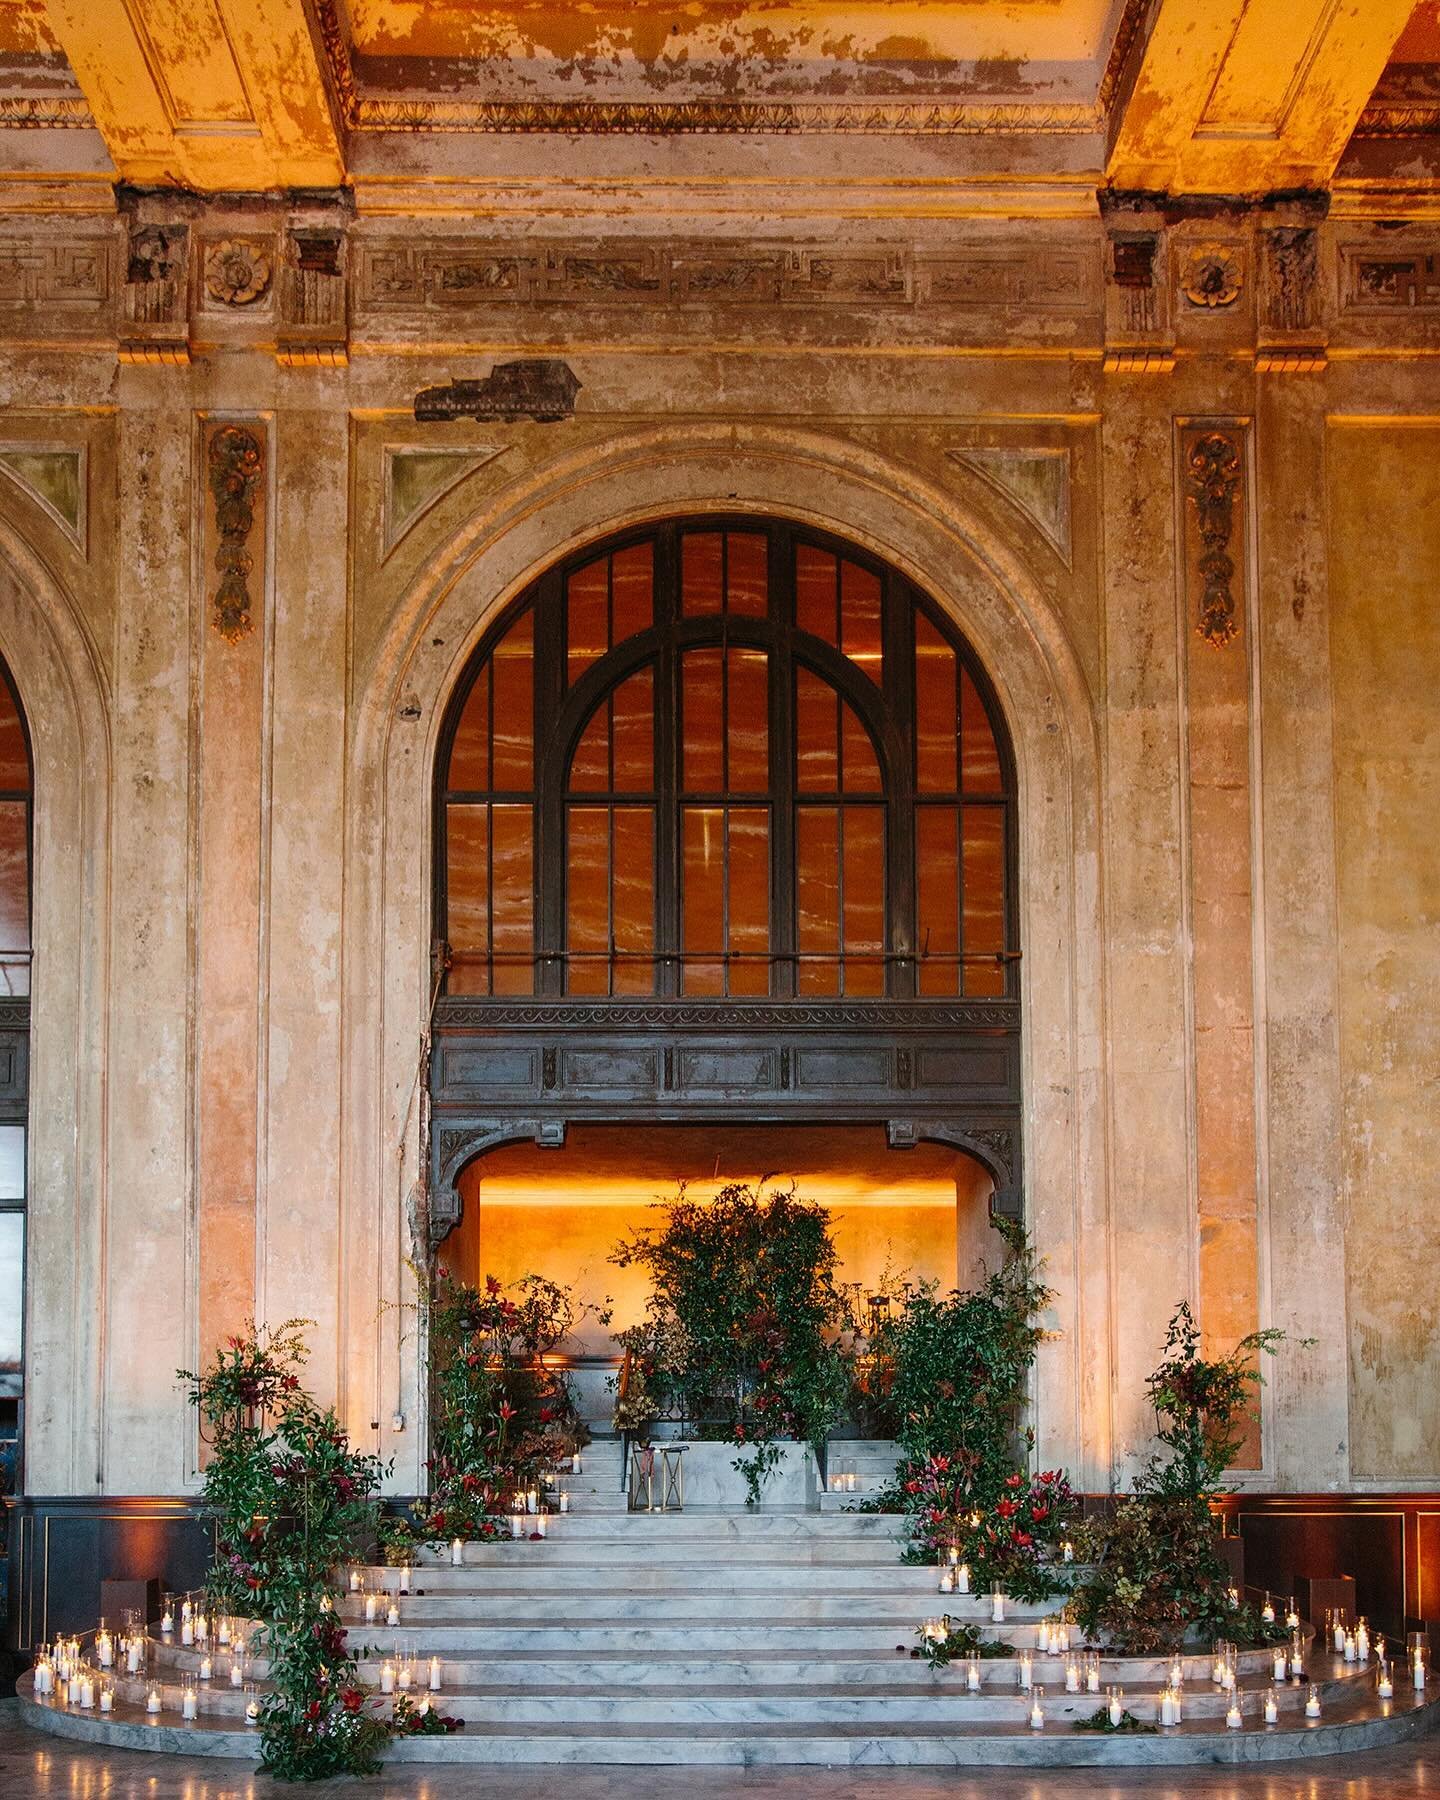 Friends, please help! One of my favorite wedding venues and a historical gem, may be on the chopping block with developers. Oakland&rsquo;s historic 16th Street station is rich with history and is a STUNNING Beaux Arts building. Please help me save i